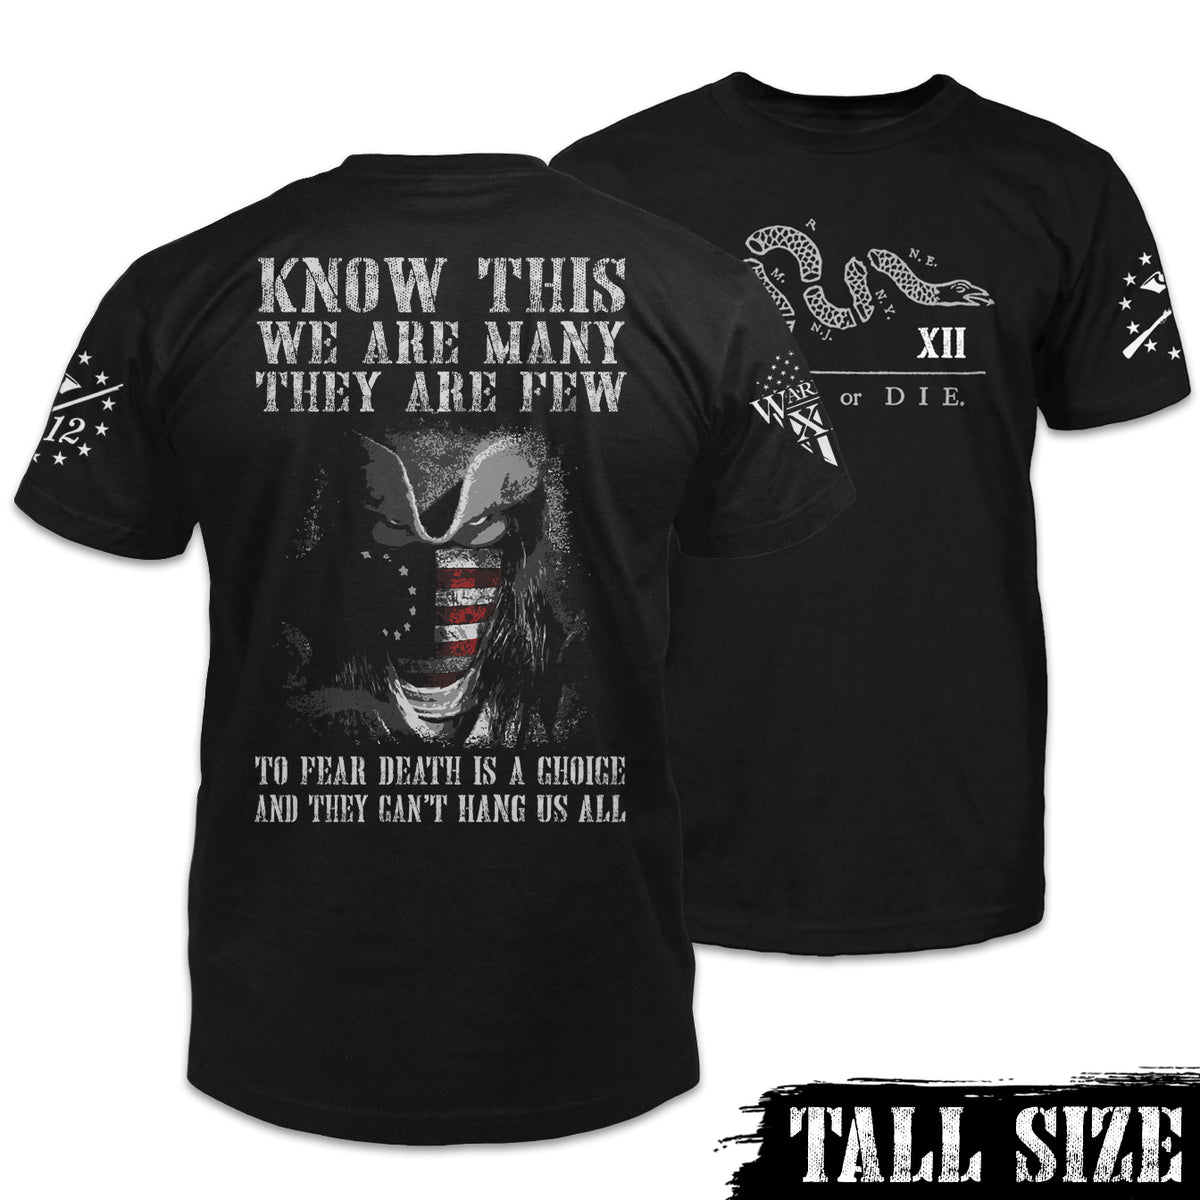 Front & back black tall sized shirt with the words, "Know This, We Are Many They Are Few. To Fear Death Is A Choice, And They Can't Hang Us All" on the back and the words "Join Or Die" on the front.